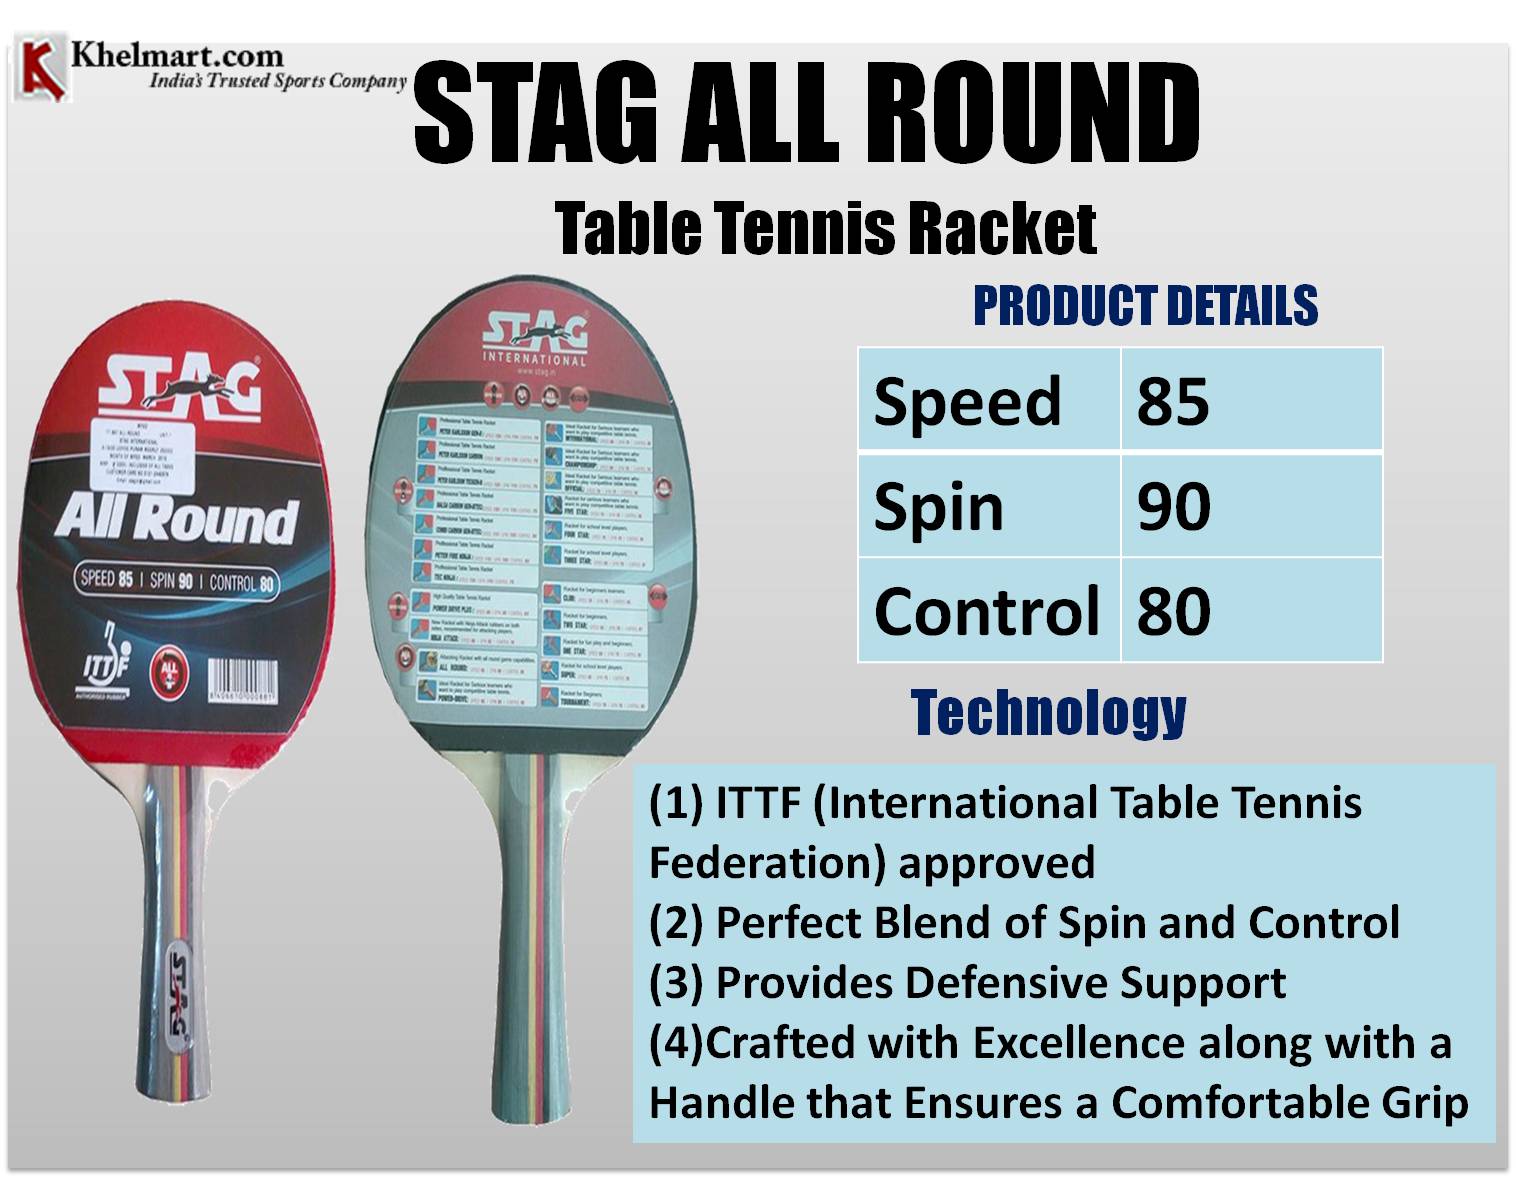 STAG_ALL_ROUND_Table_Tennis_Racket.jpg